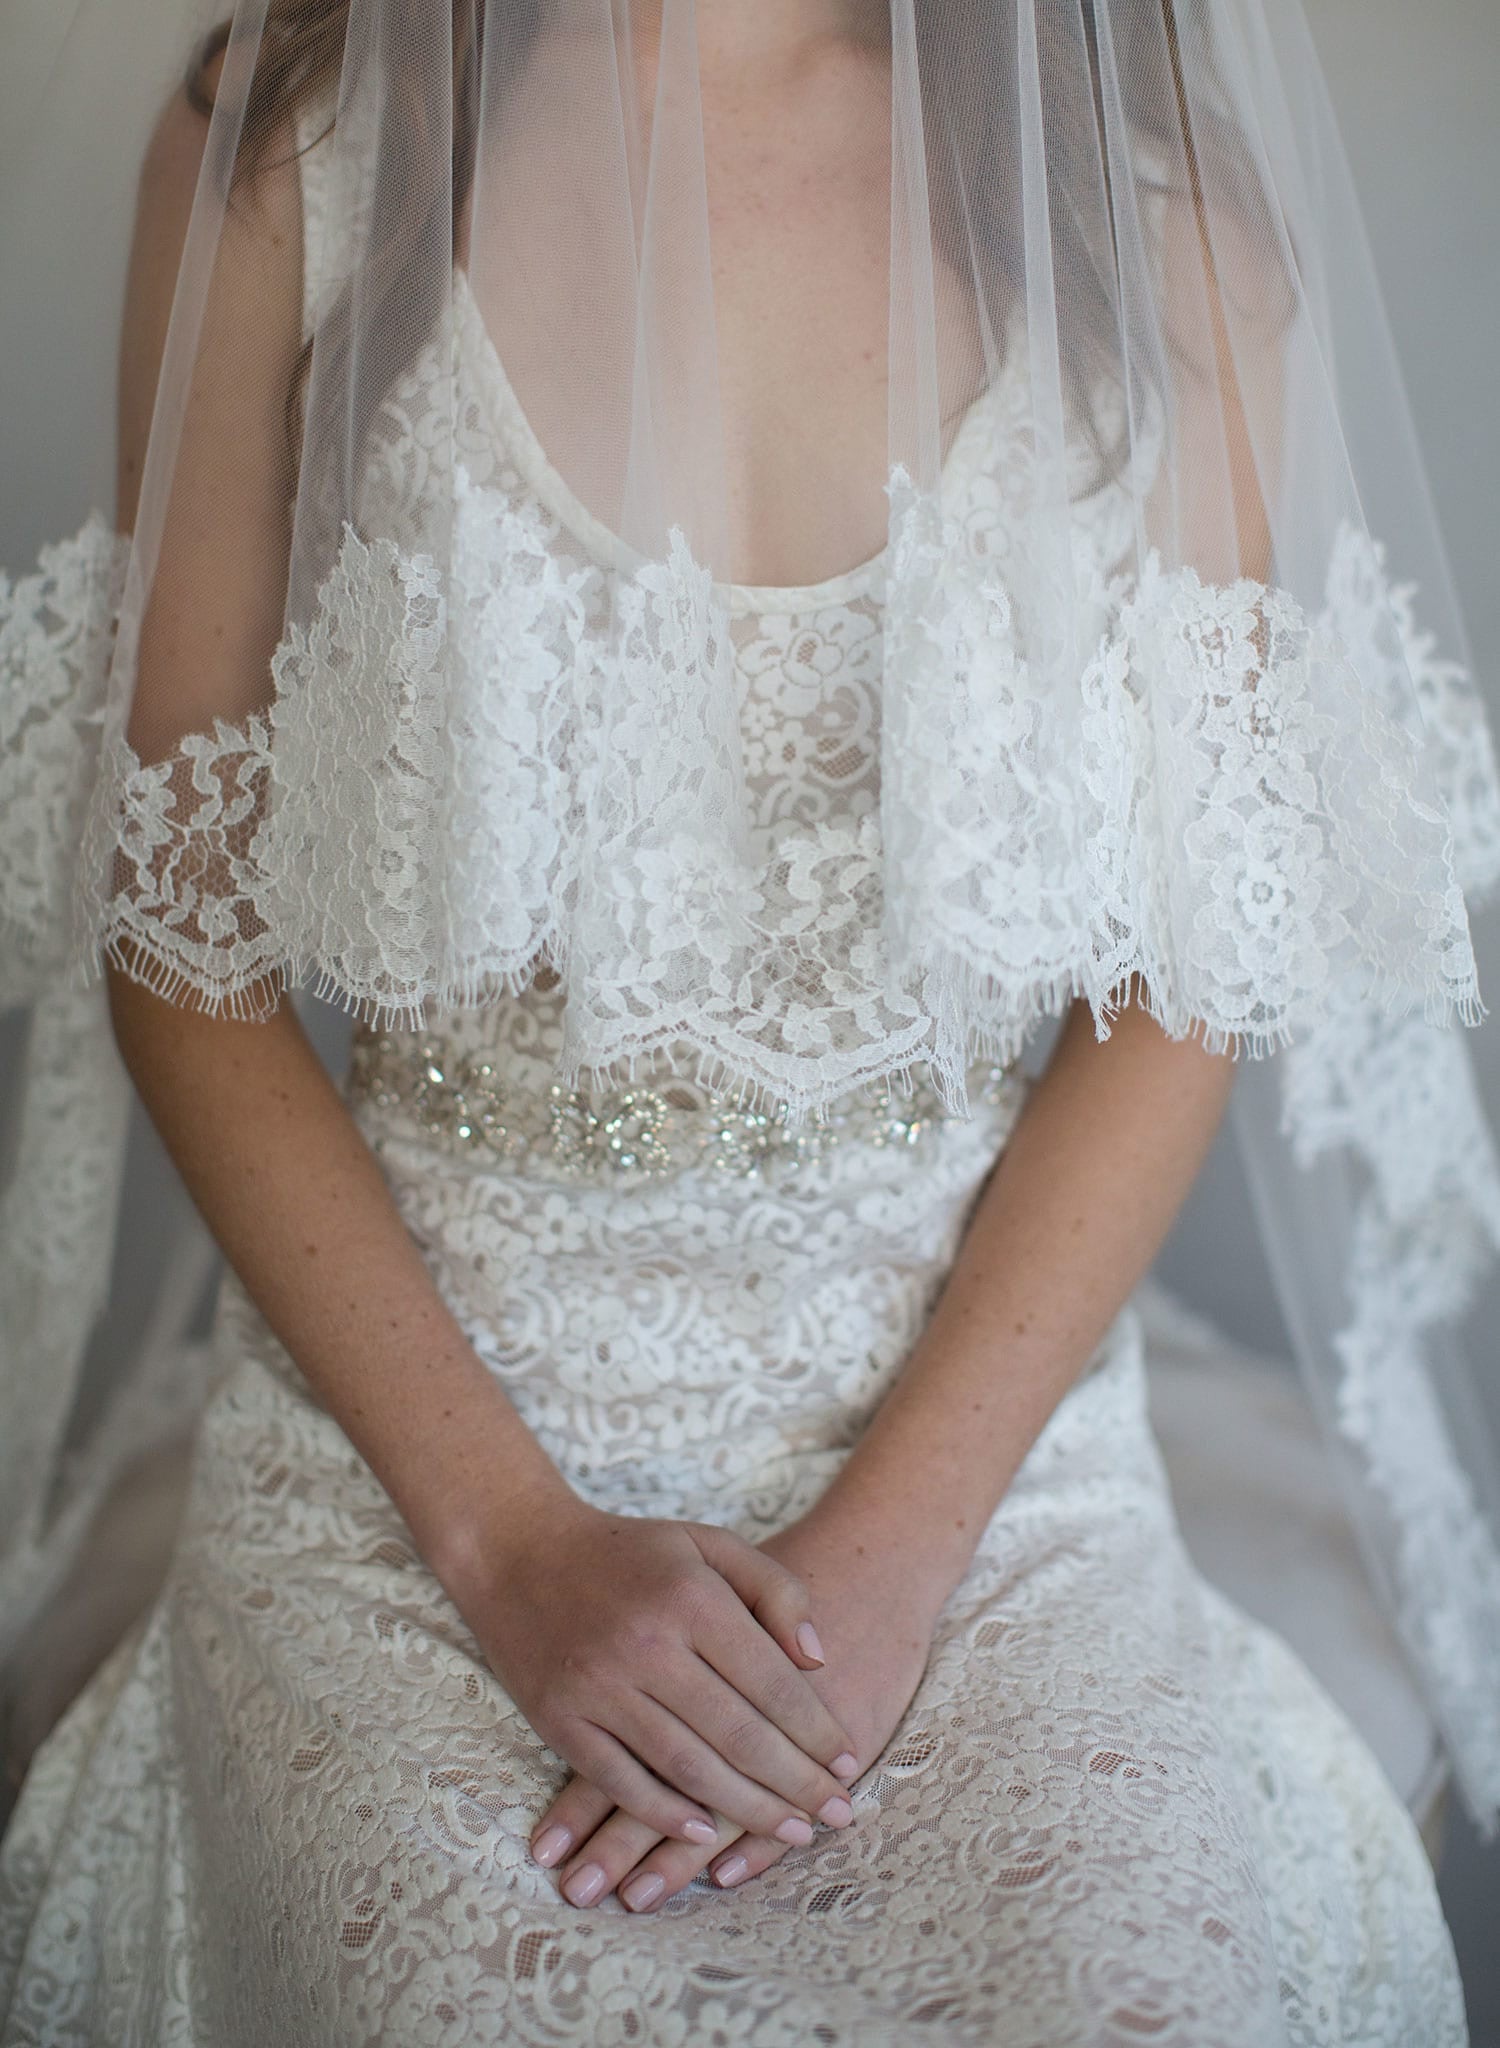 French lace simple veil with blusher - Style #787